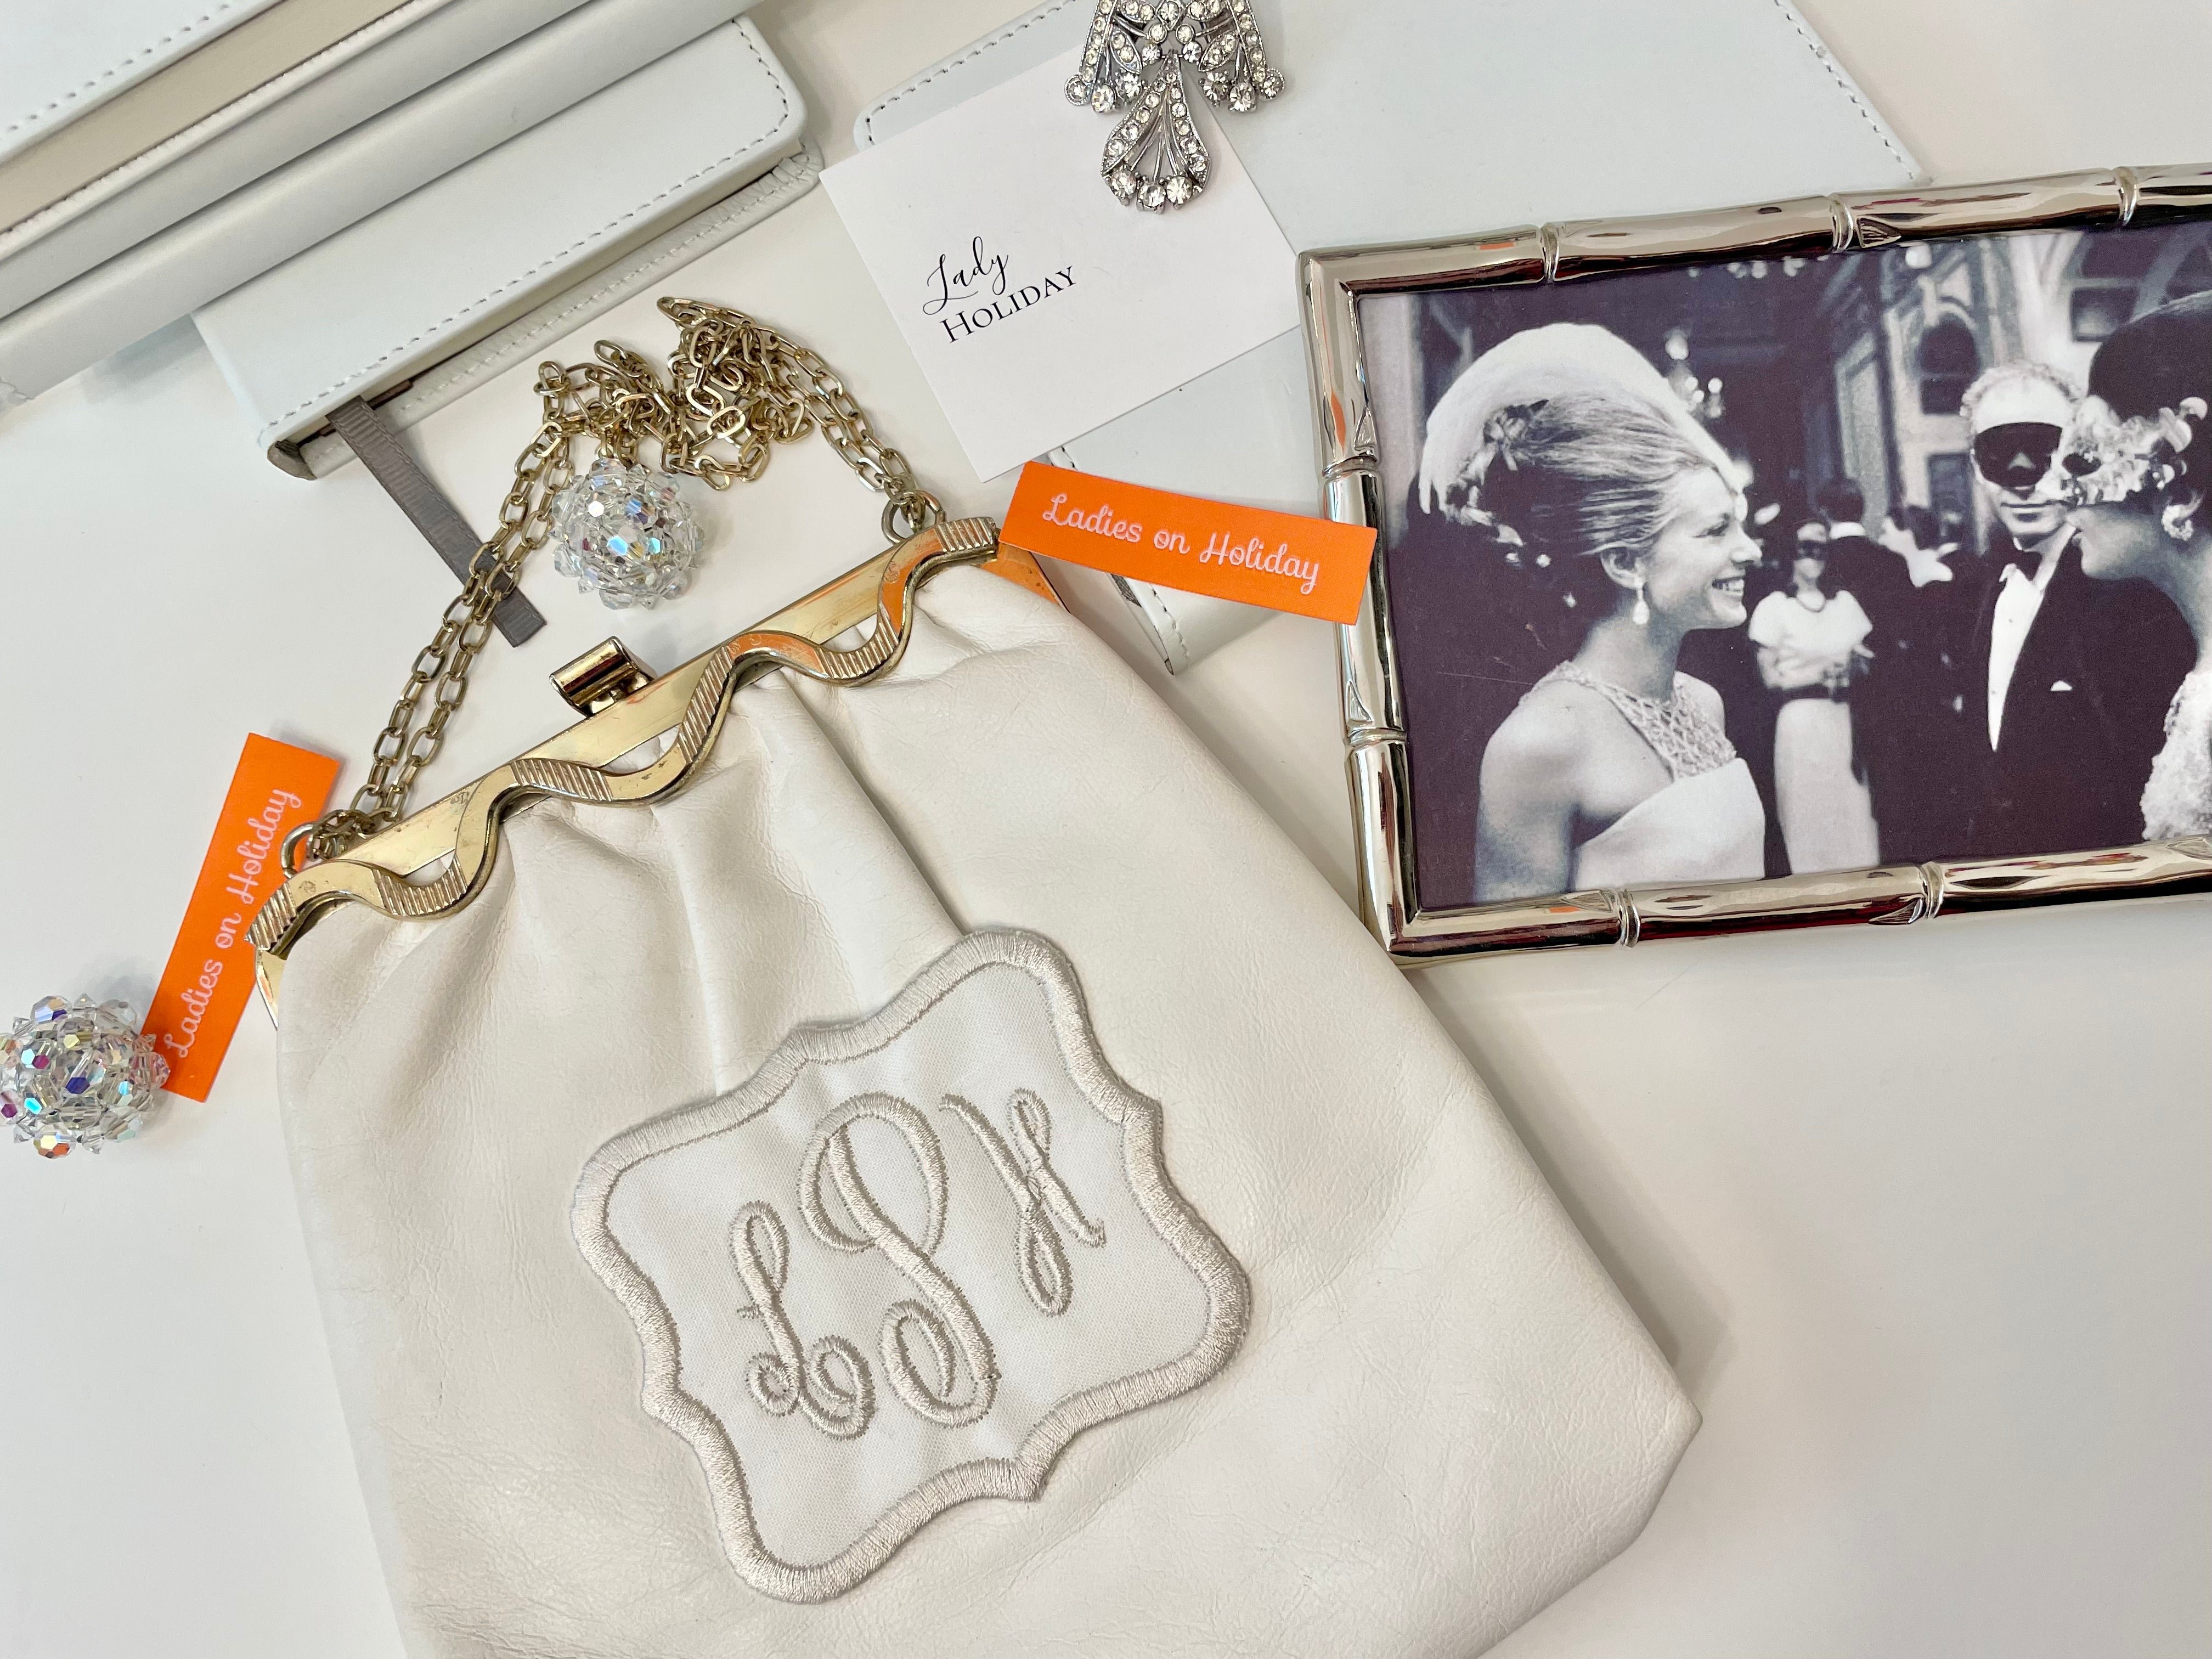 Ladies On Holiday... custom vintage clutch bags adorned with a monogram....